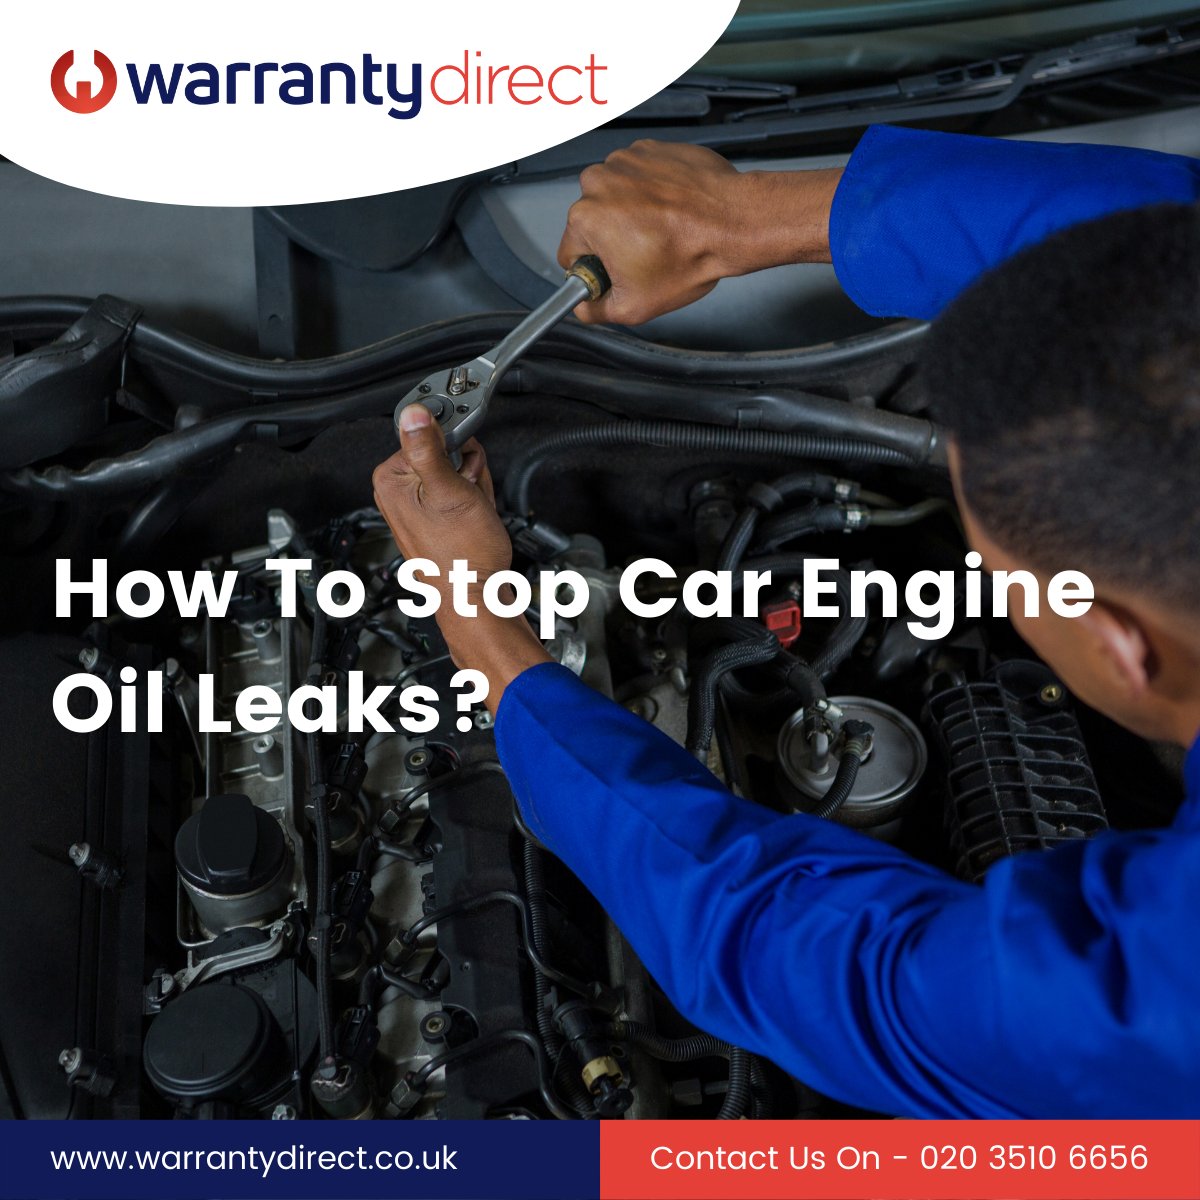 Here are ways to fix an oil leaking car: Regularly Change Filter and Oil, Using The Right Oil, Regular Inspections, Optimum Oil Filling Consulting A Mechanic, etc. For more information on this visit https://t.co/DJ2zJe3egM
#caroilleak #oilleak #oilleaks #engineoil #carwarranty https://t.co/nBl08YHvhA